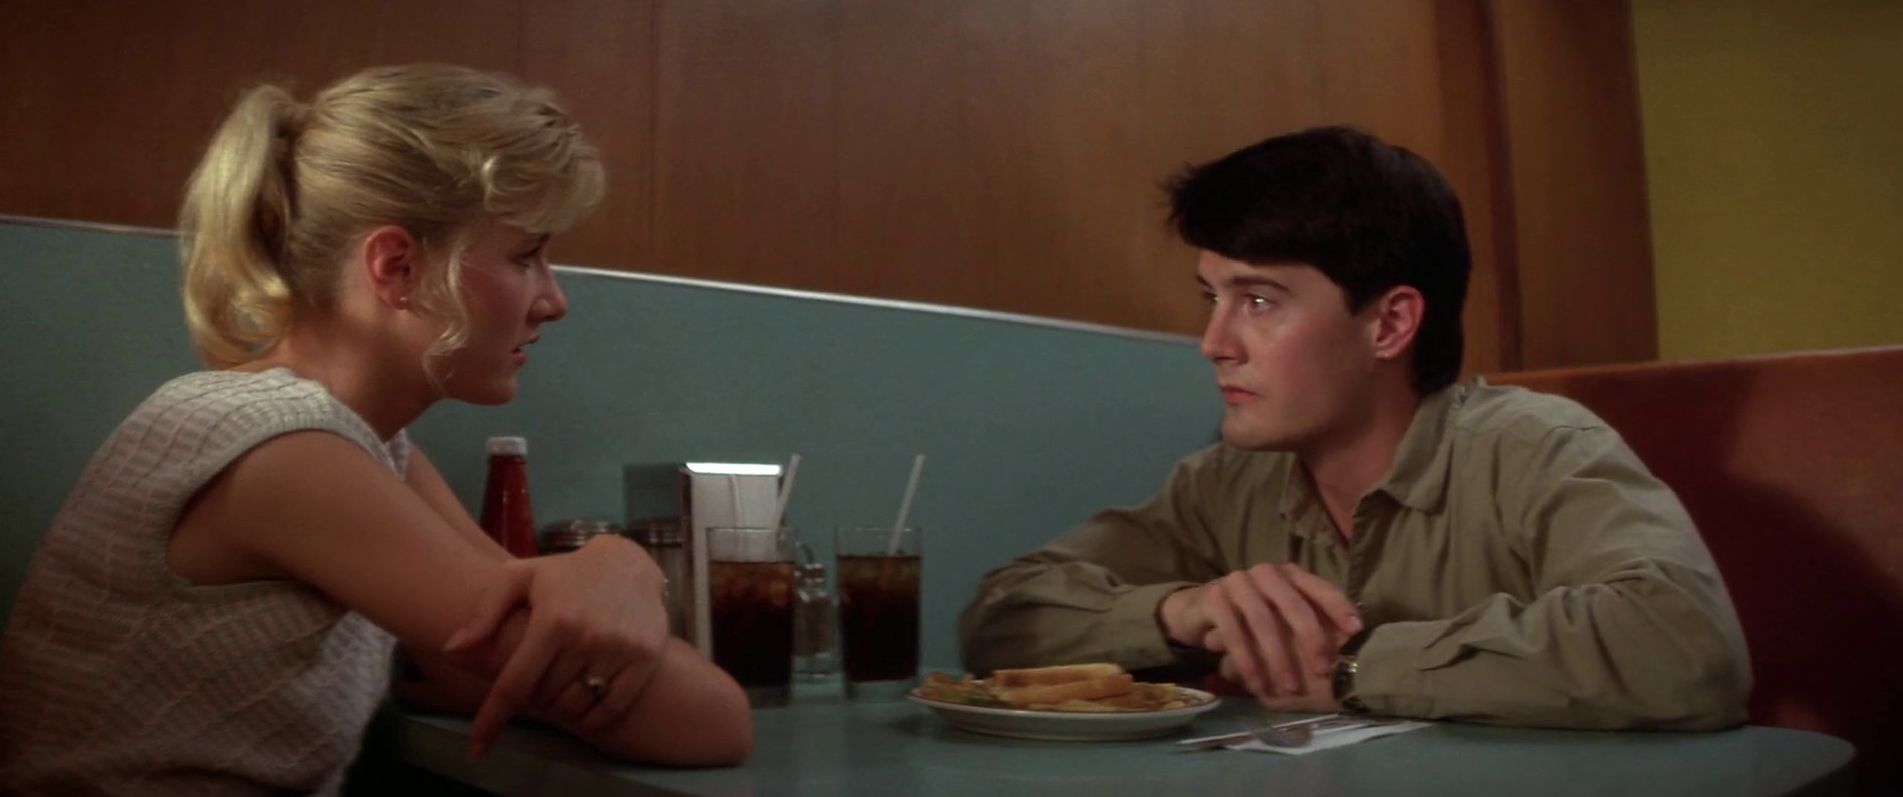 Kyle MacLachlan and Laura Dern, one of the great cinematic p